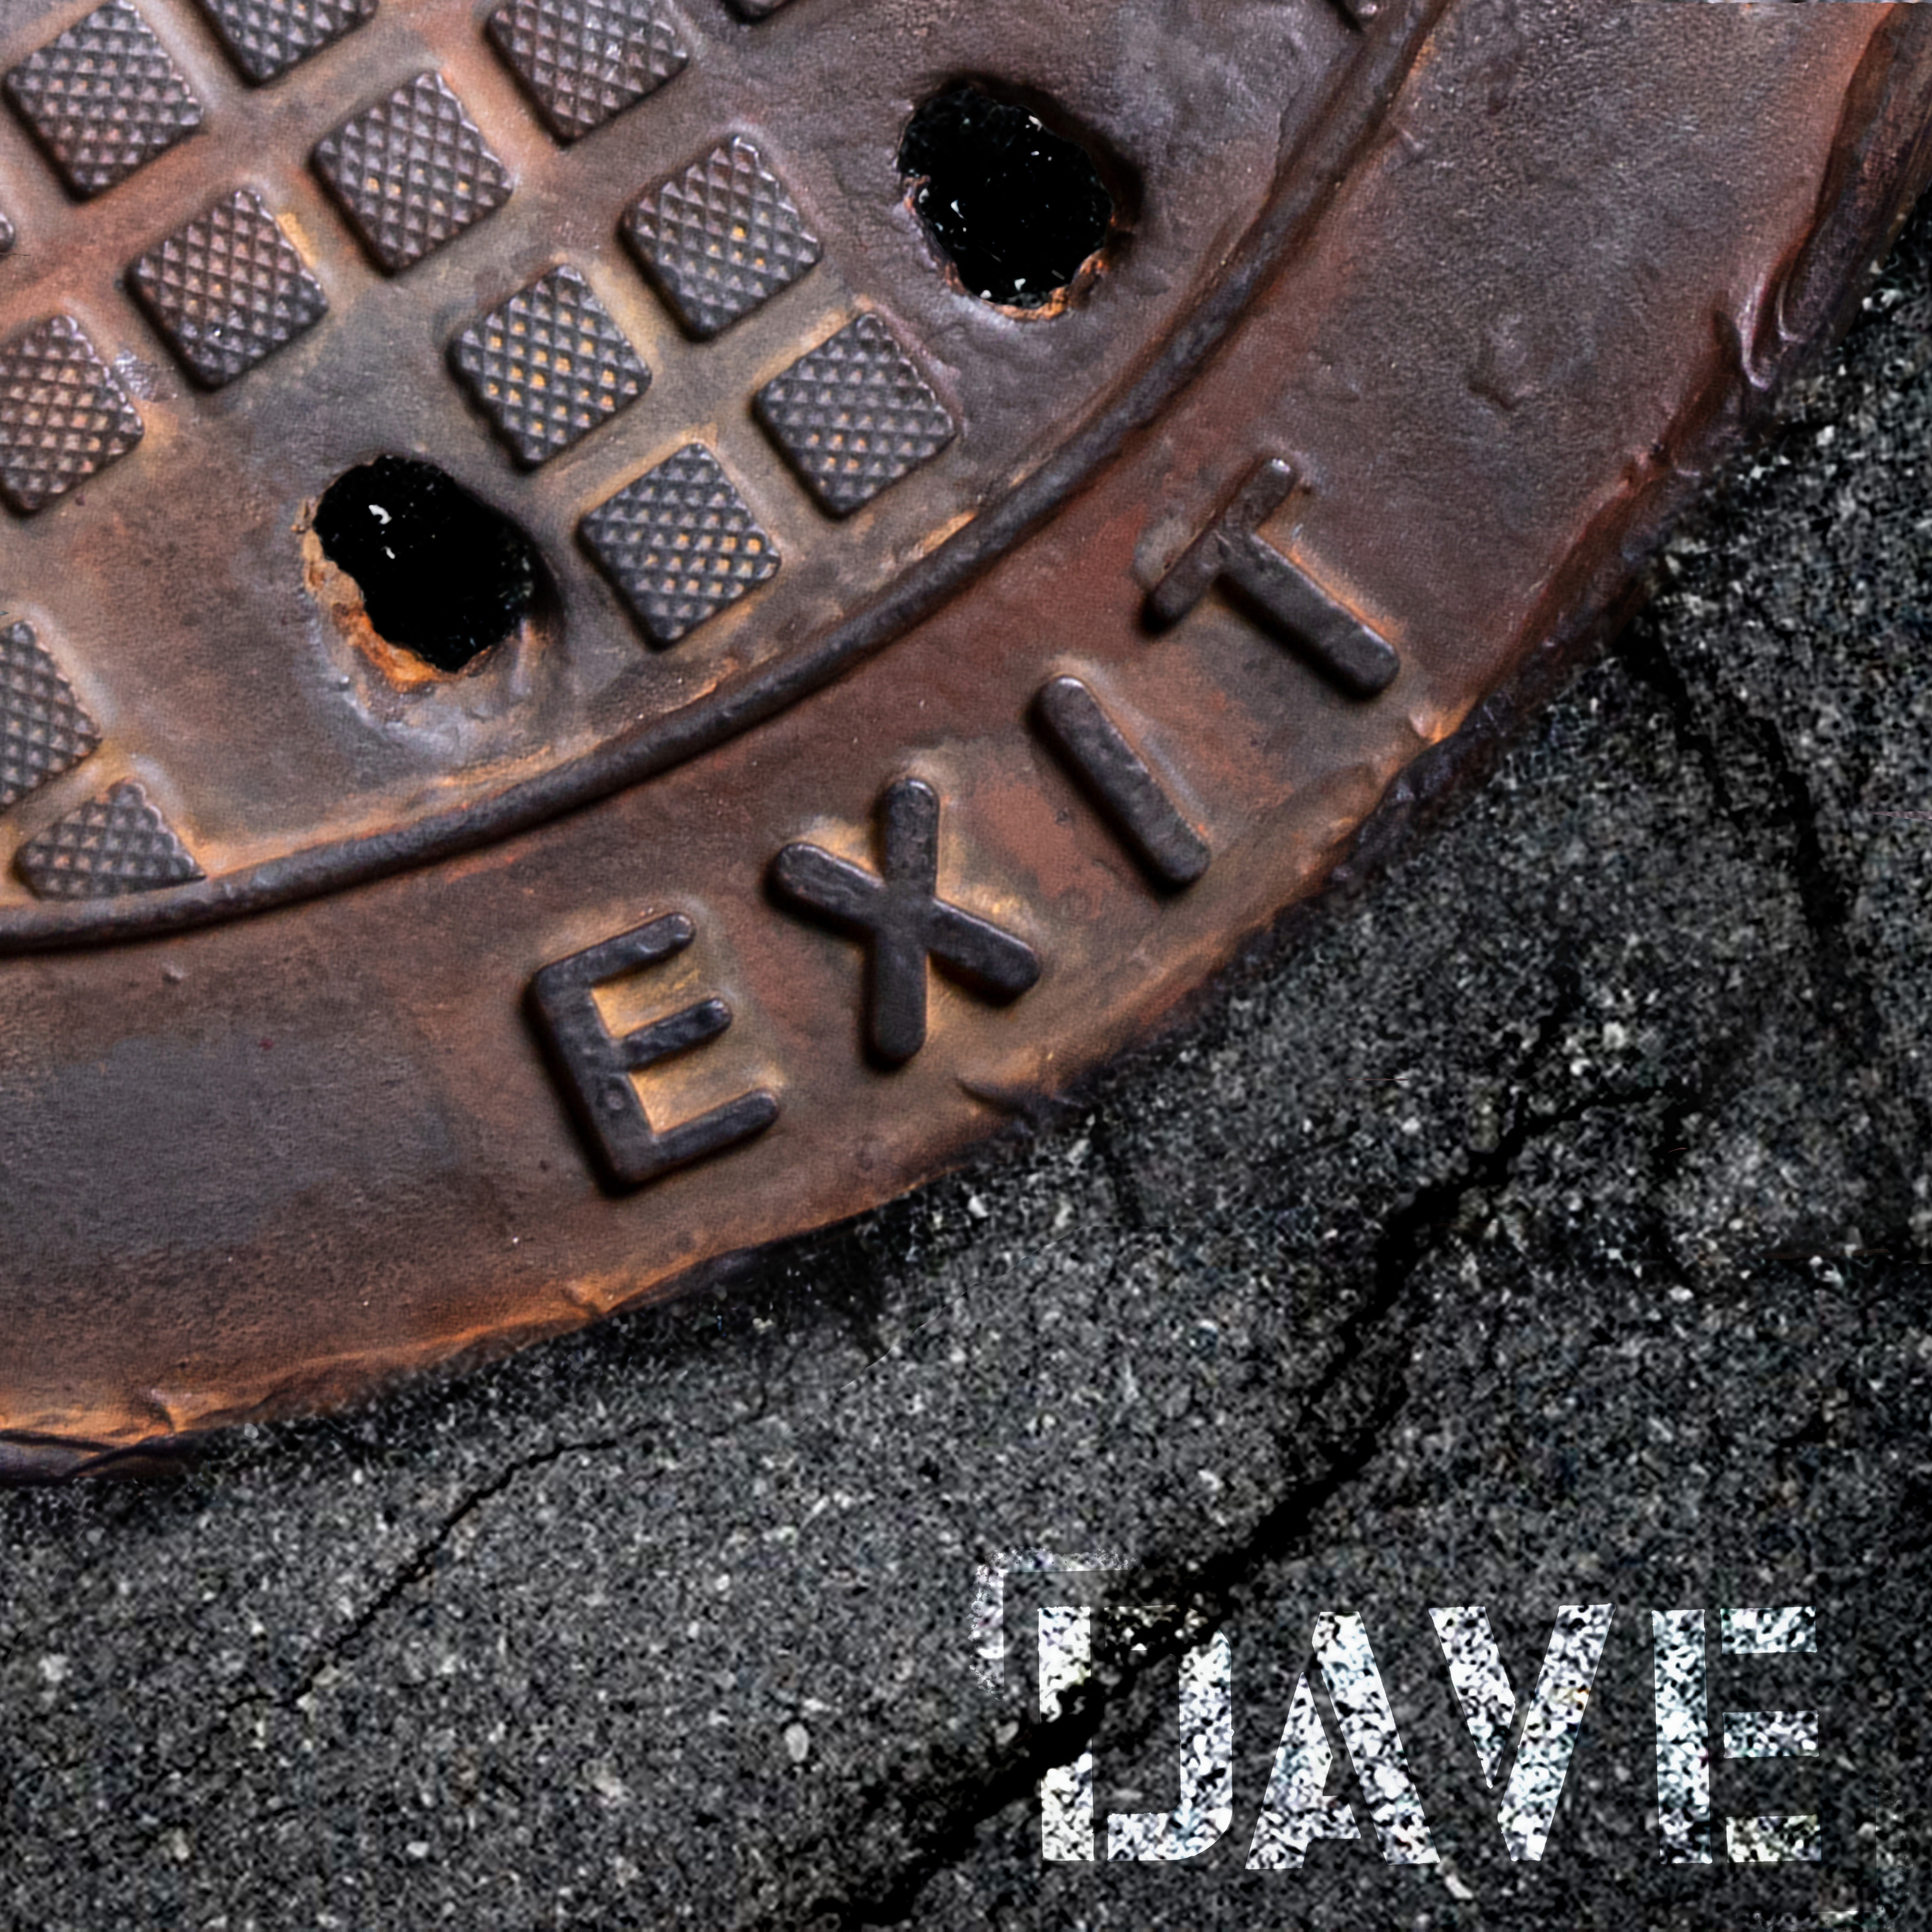 Dave_exit